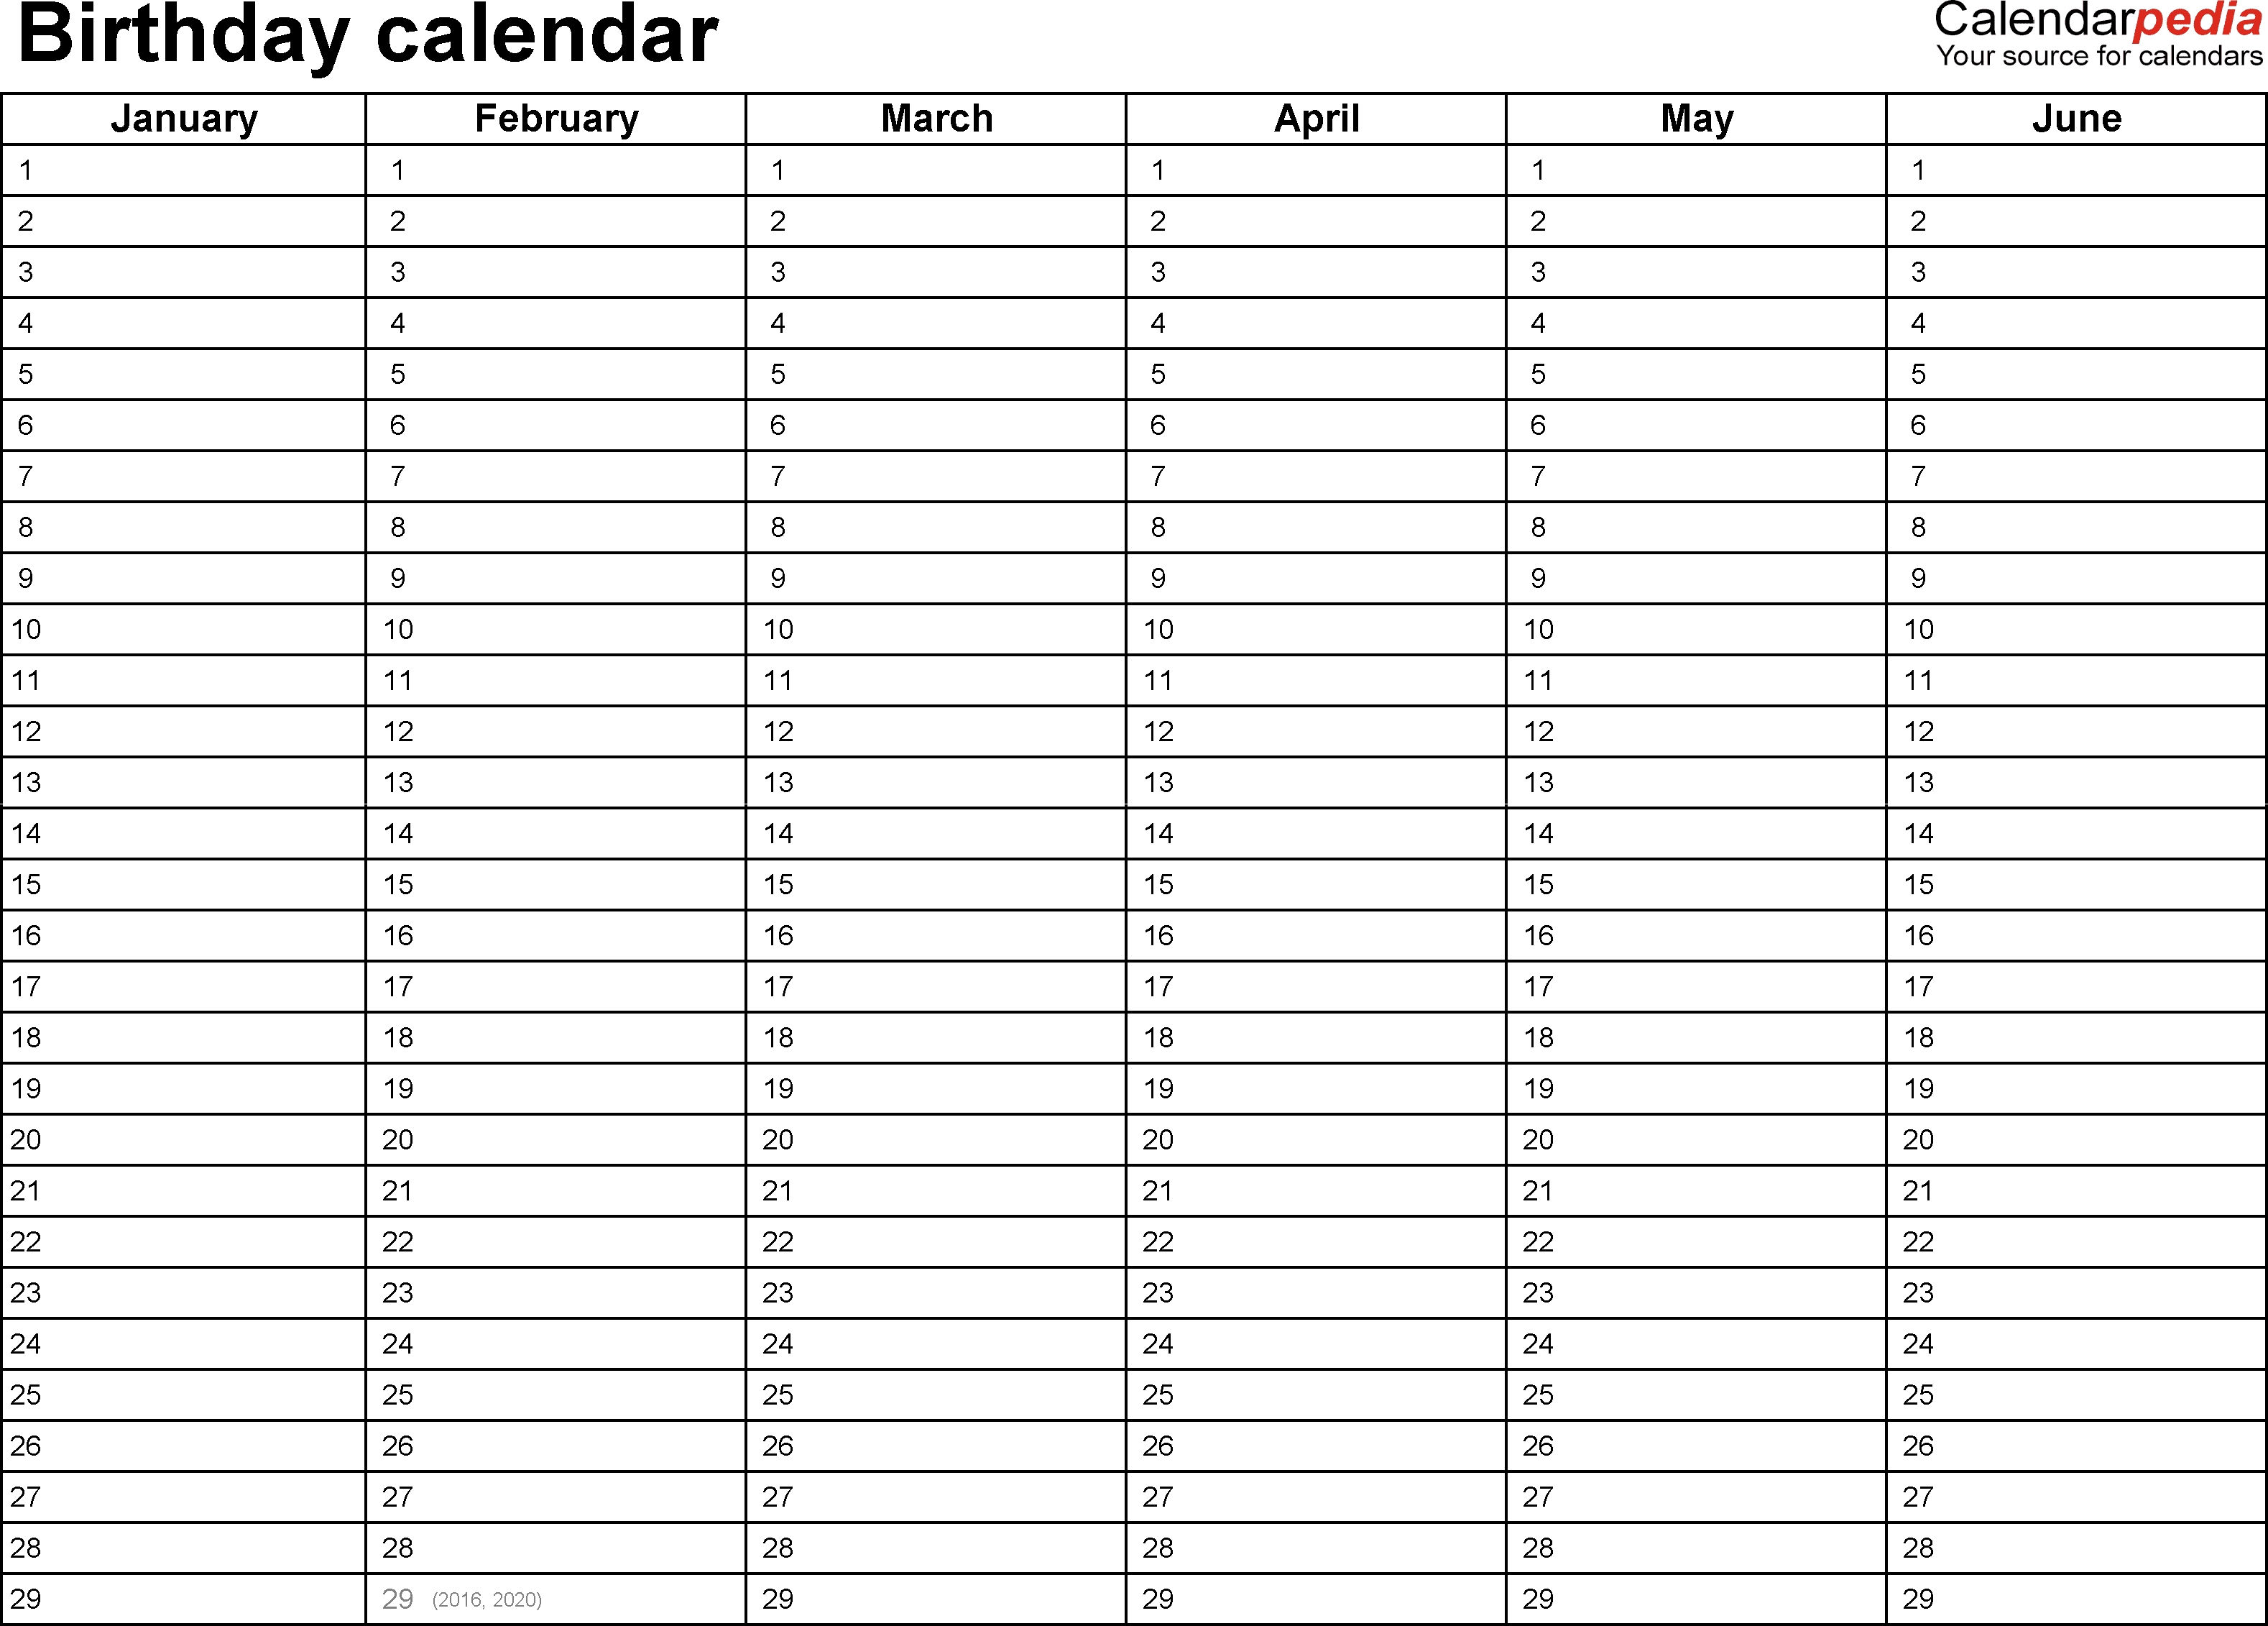 Birthday Calendars - 7 Free Printable Excel Templates within Format For A Birthday/ Anniversary Calendar